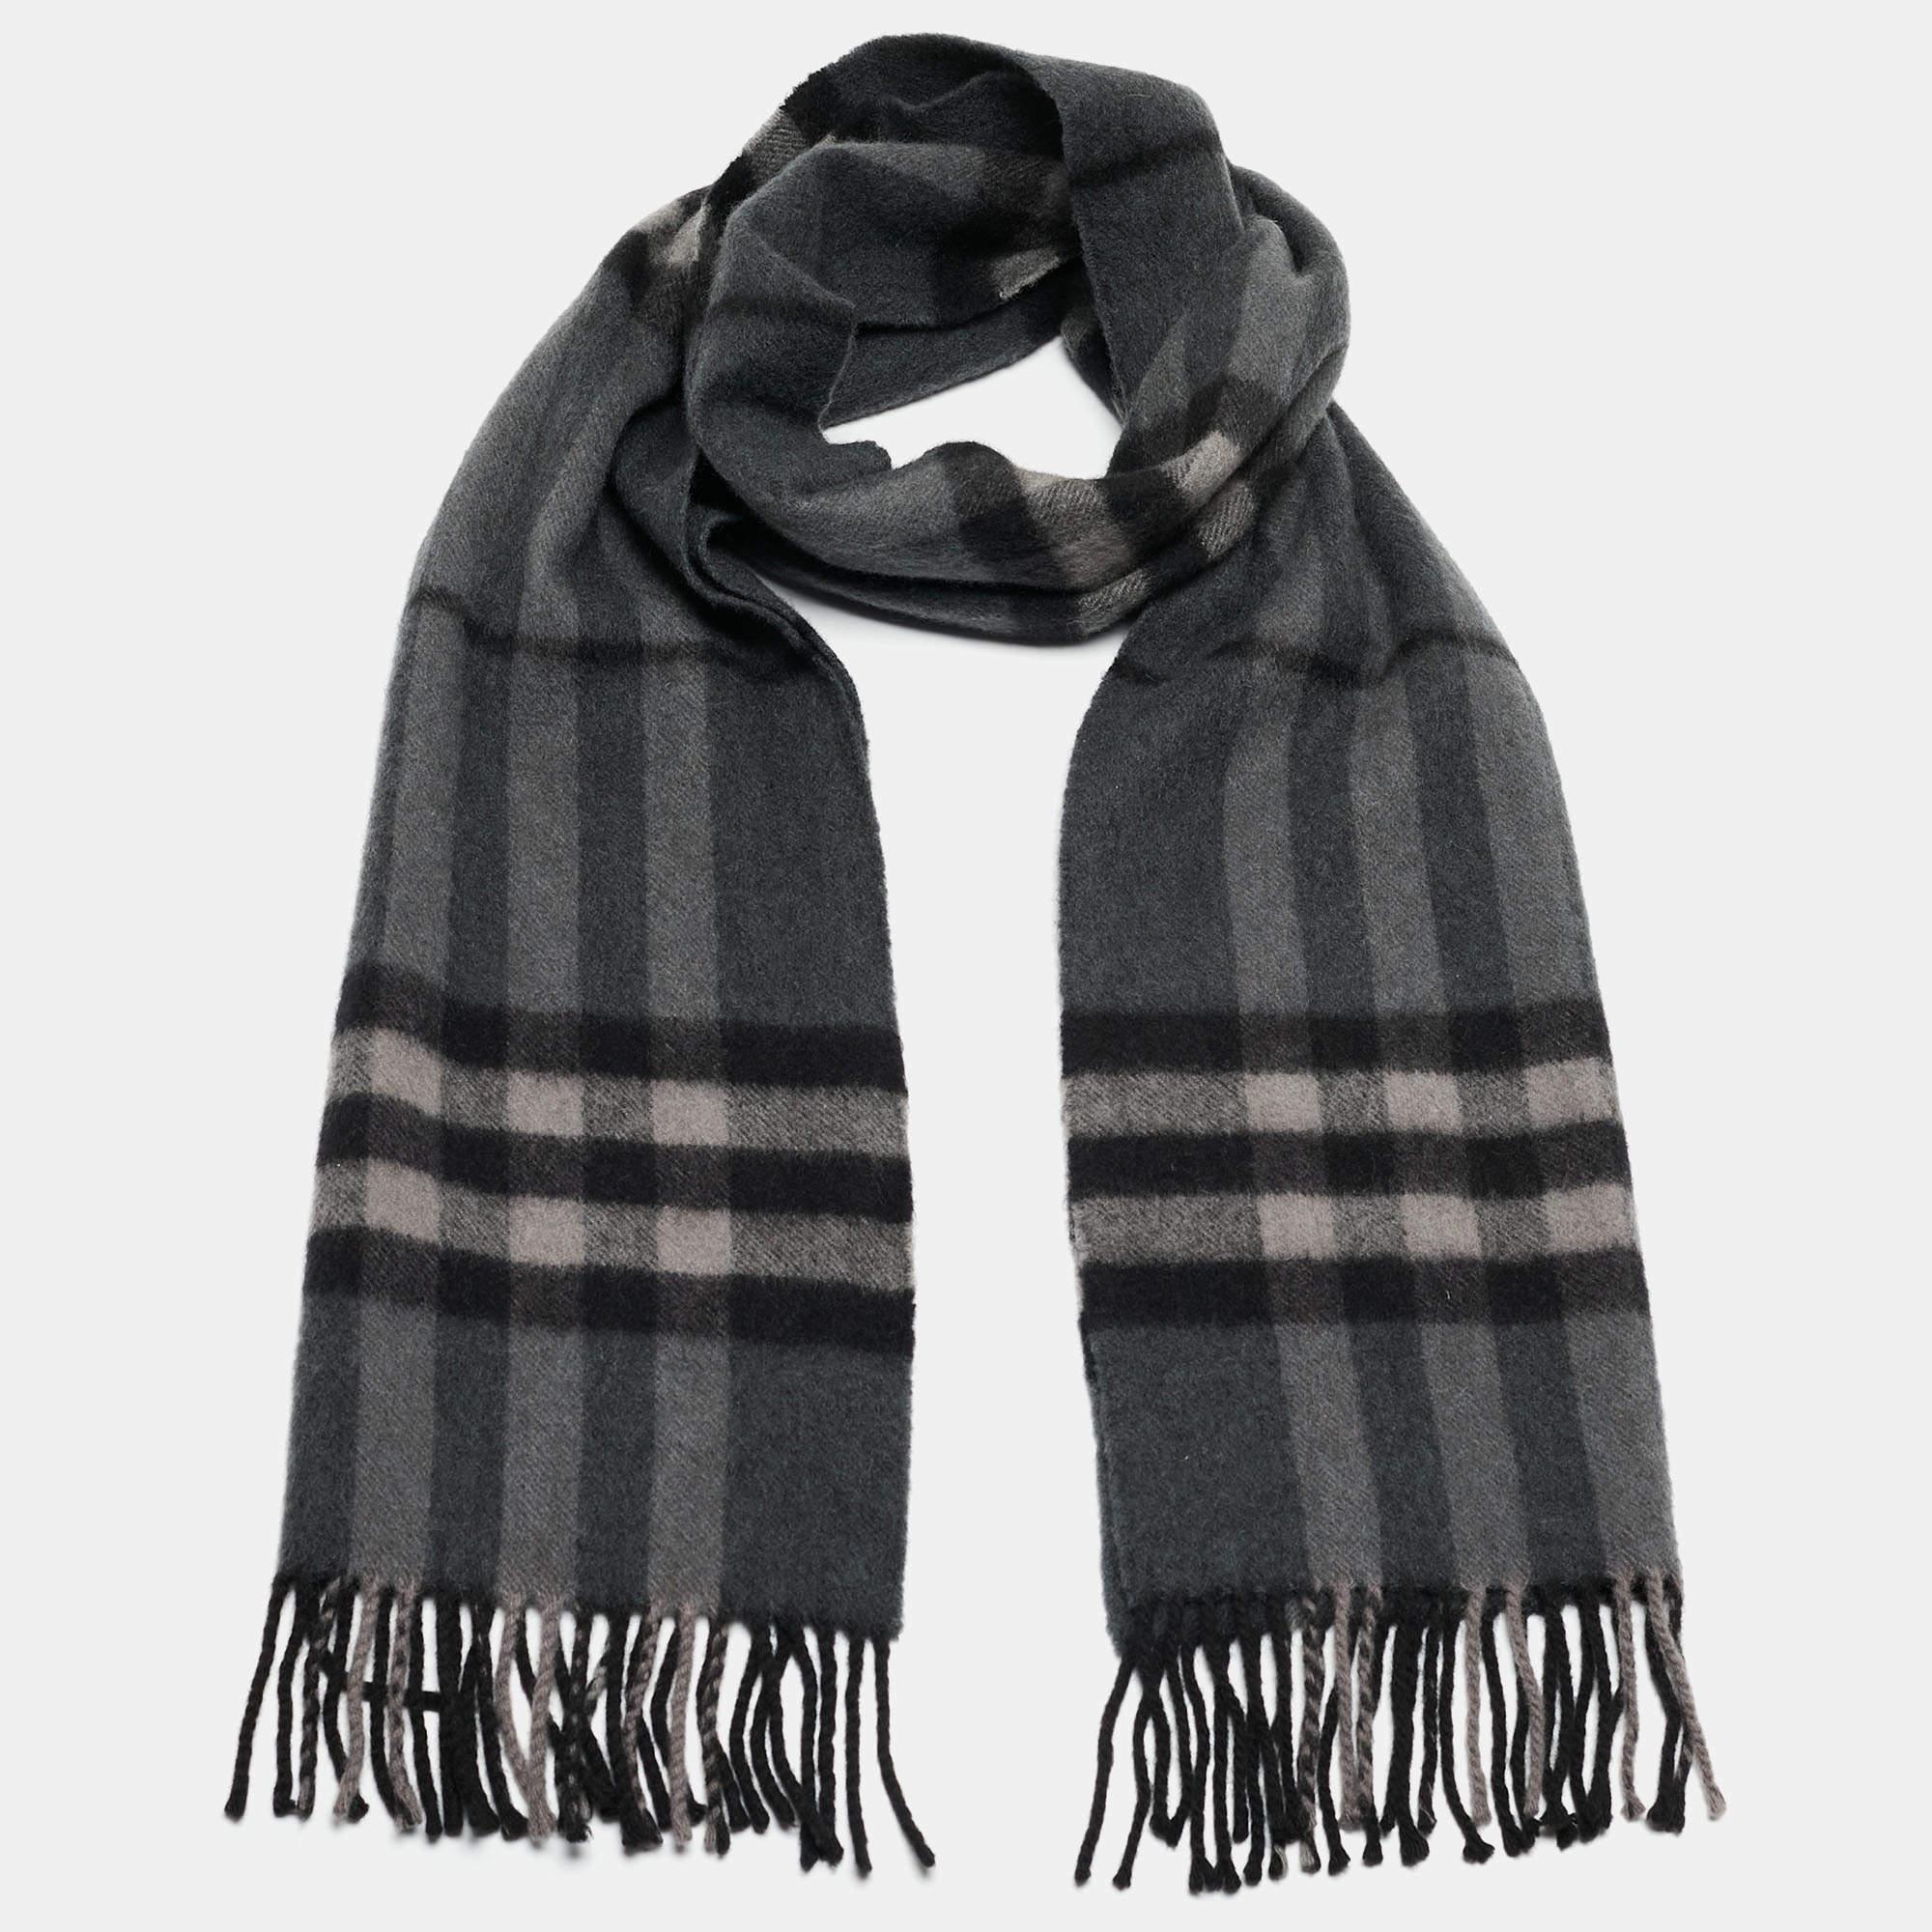 This beautiful scarf is a must-have for any fan of the British luxury fashion house, Burberry. Featuring their iconic Check pattern in breezy shades of grey, it would look absolutely fantastic worn underneath a light winter coat

